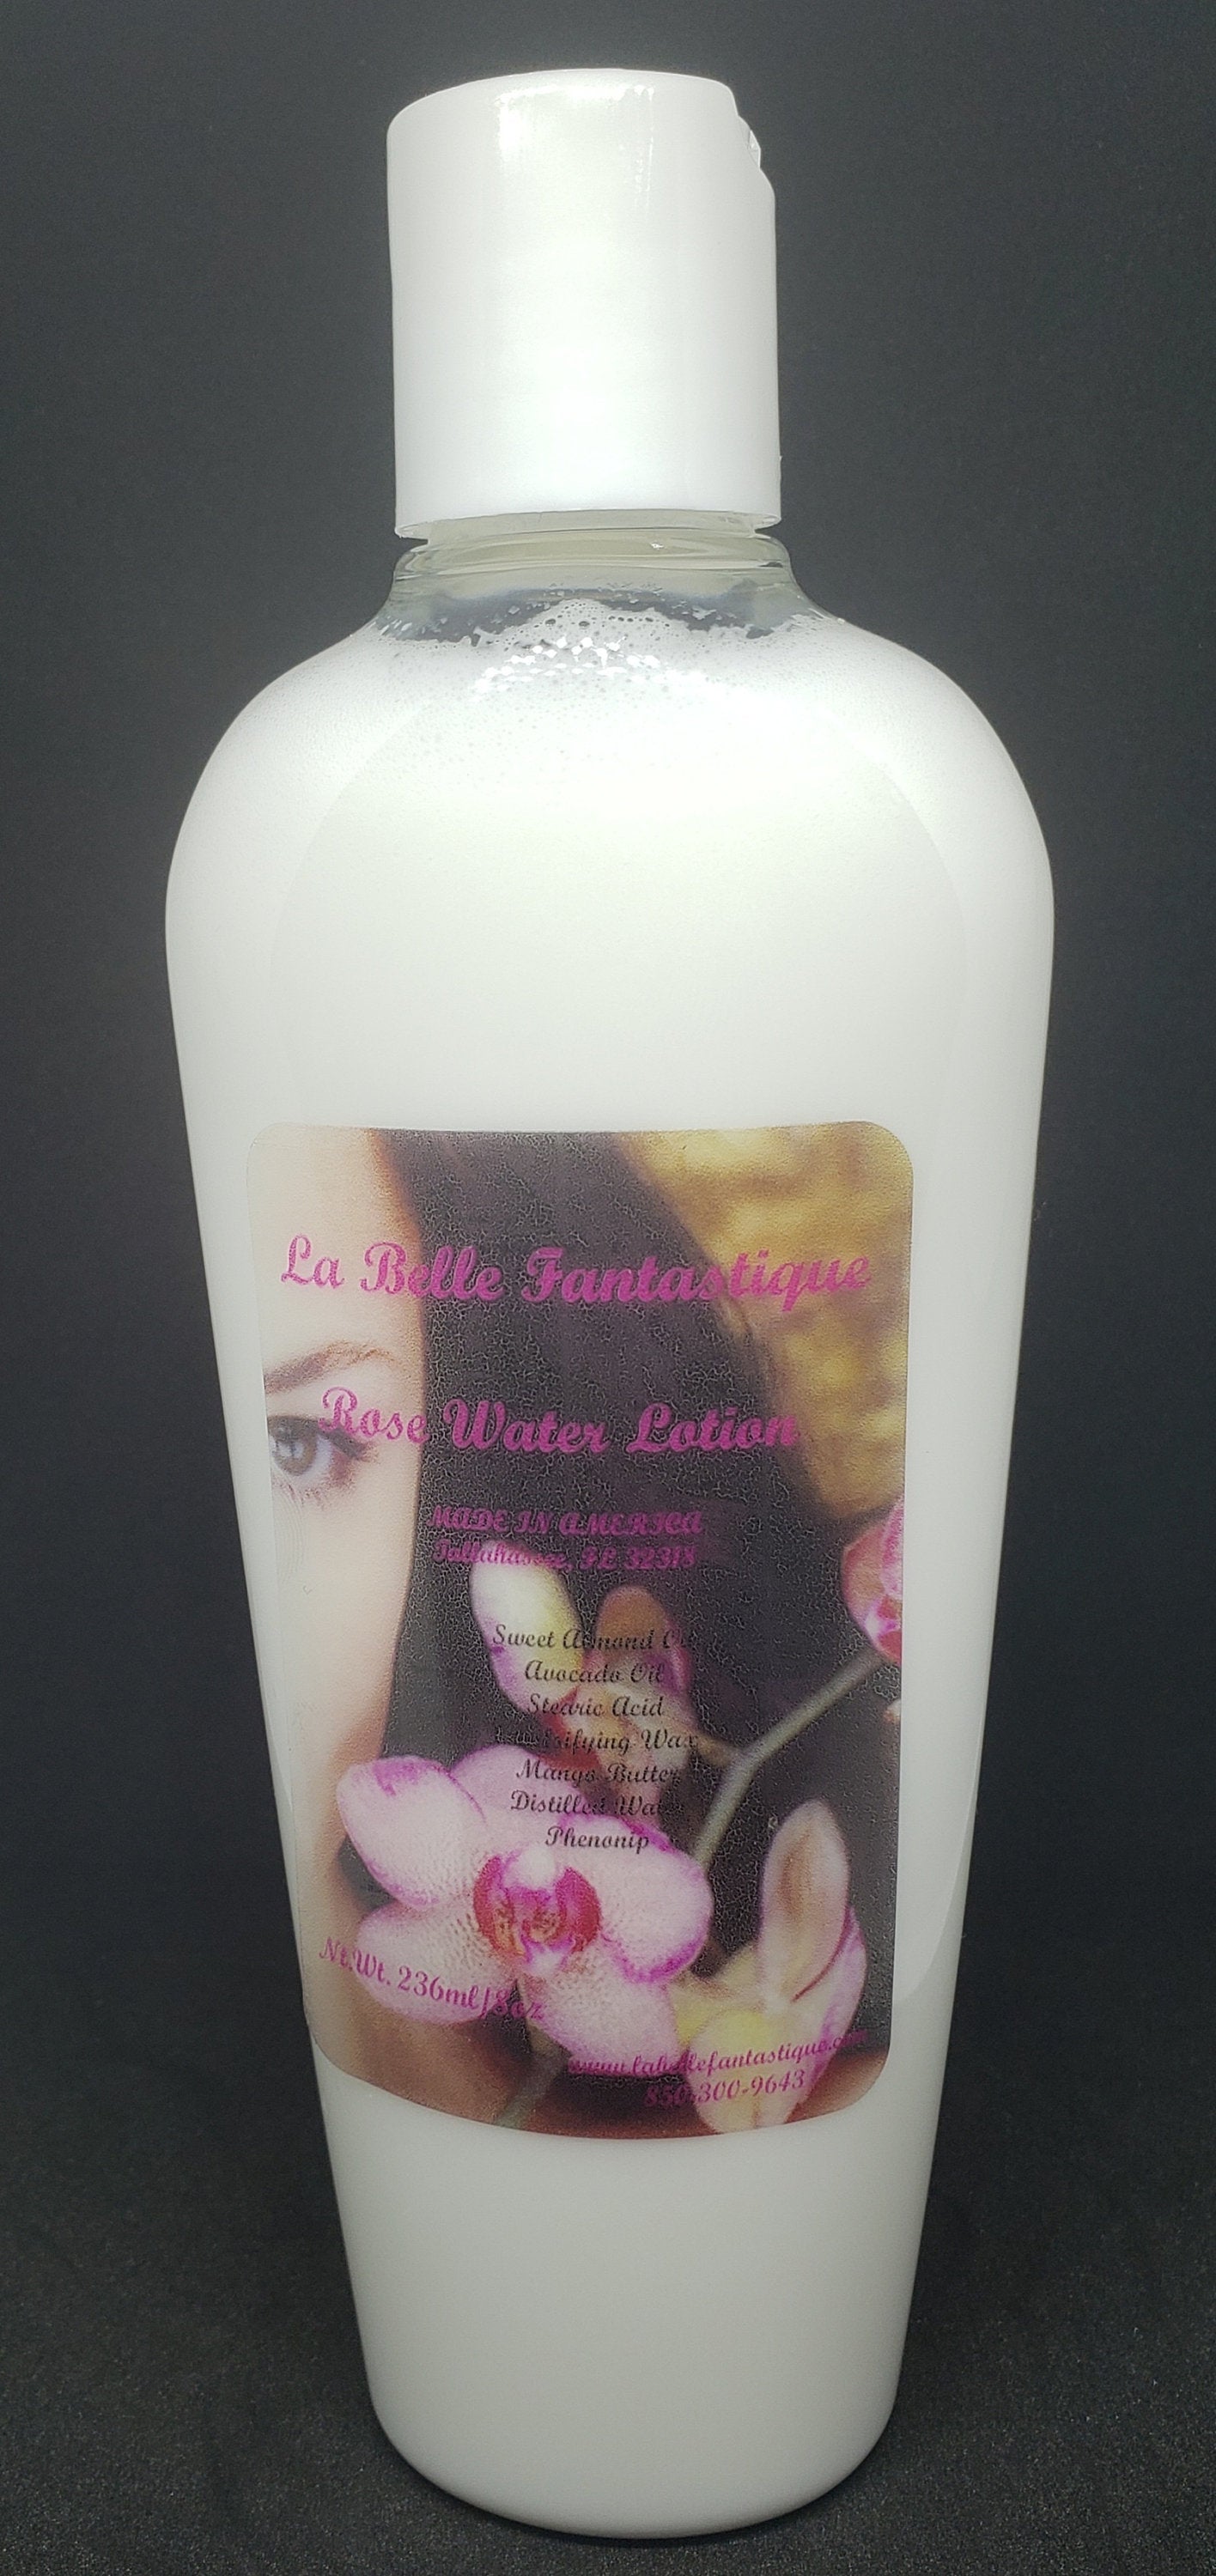 Rose Water Lotion-Rose Water Moisturizing Face & Body Lotion